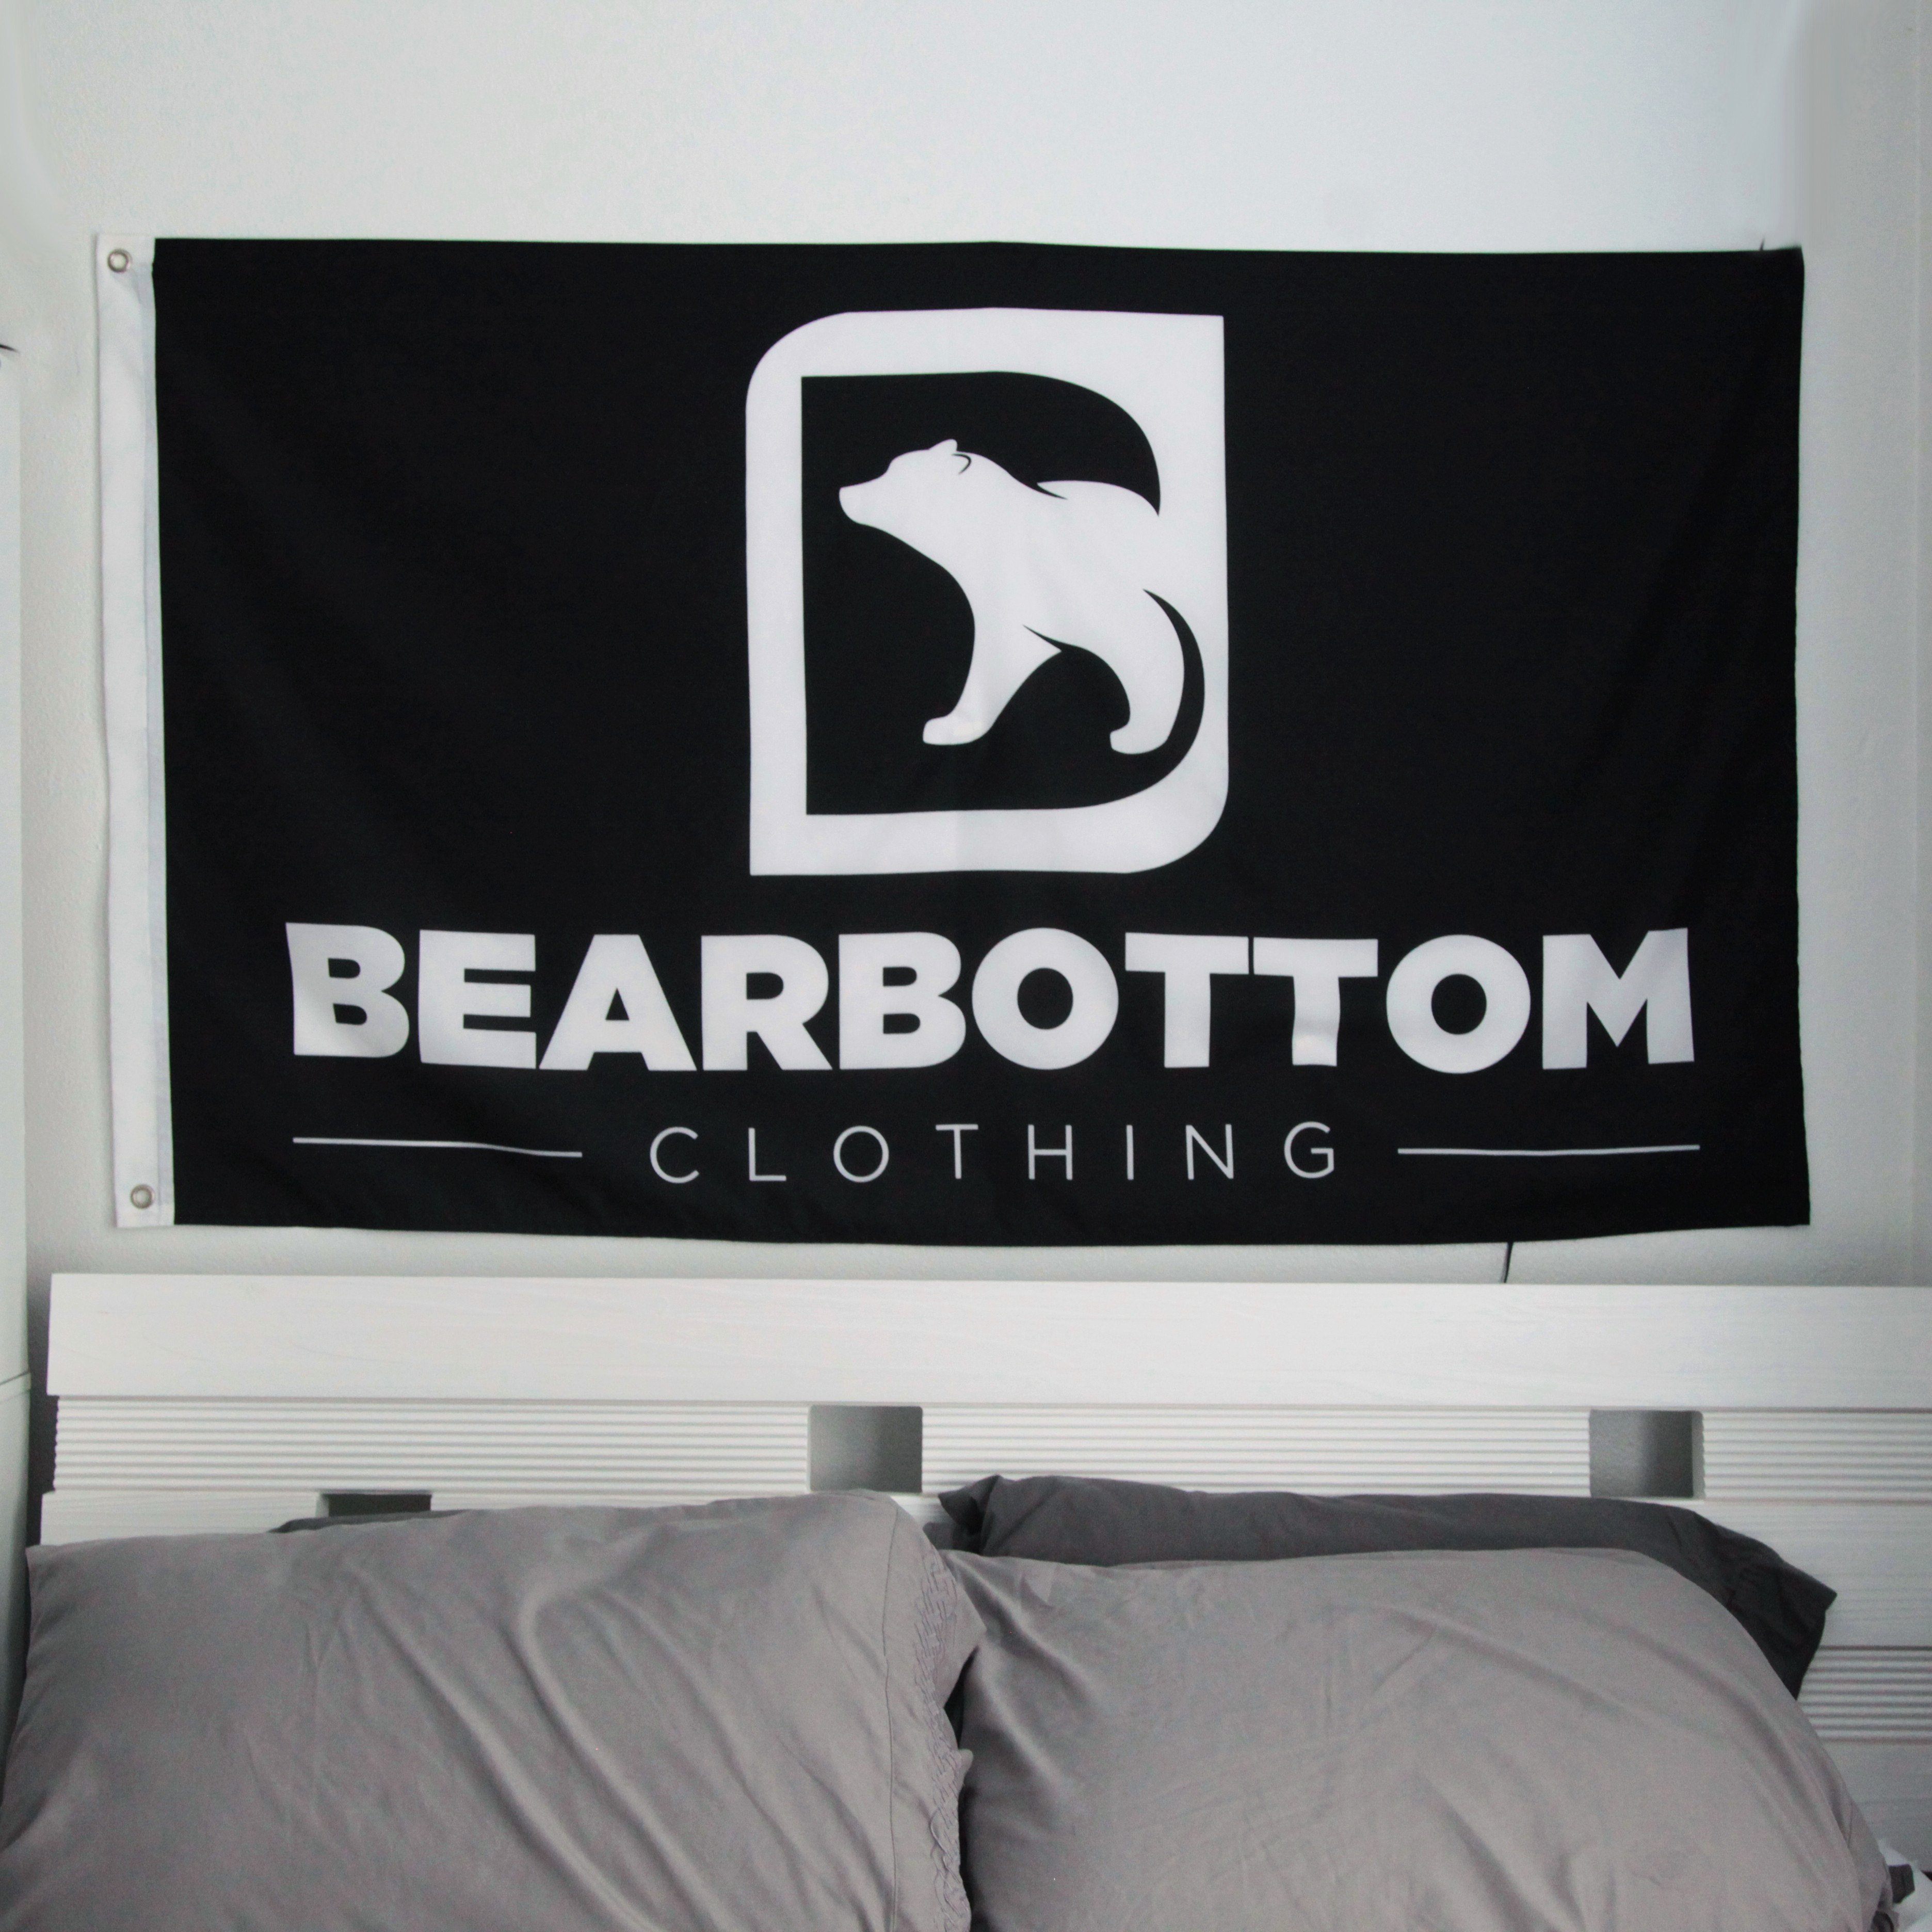 The Bearbottom Flag - Bearbottom Clothing